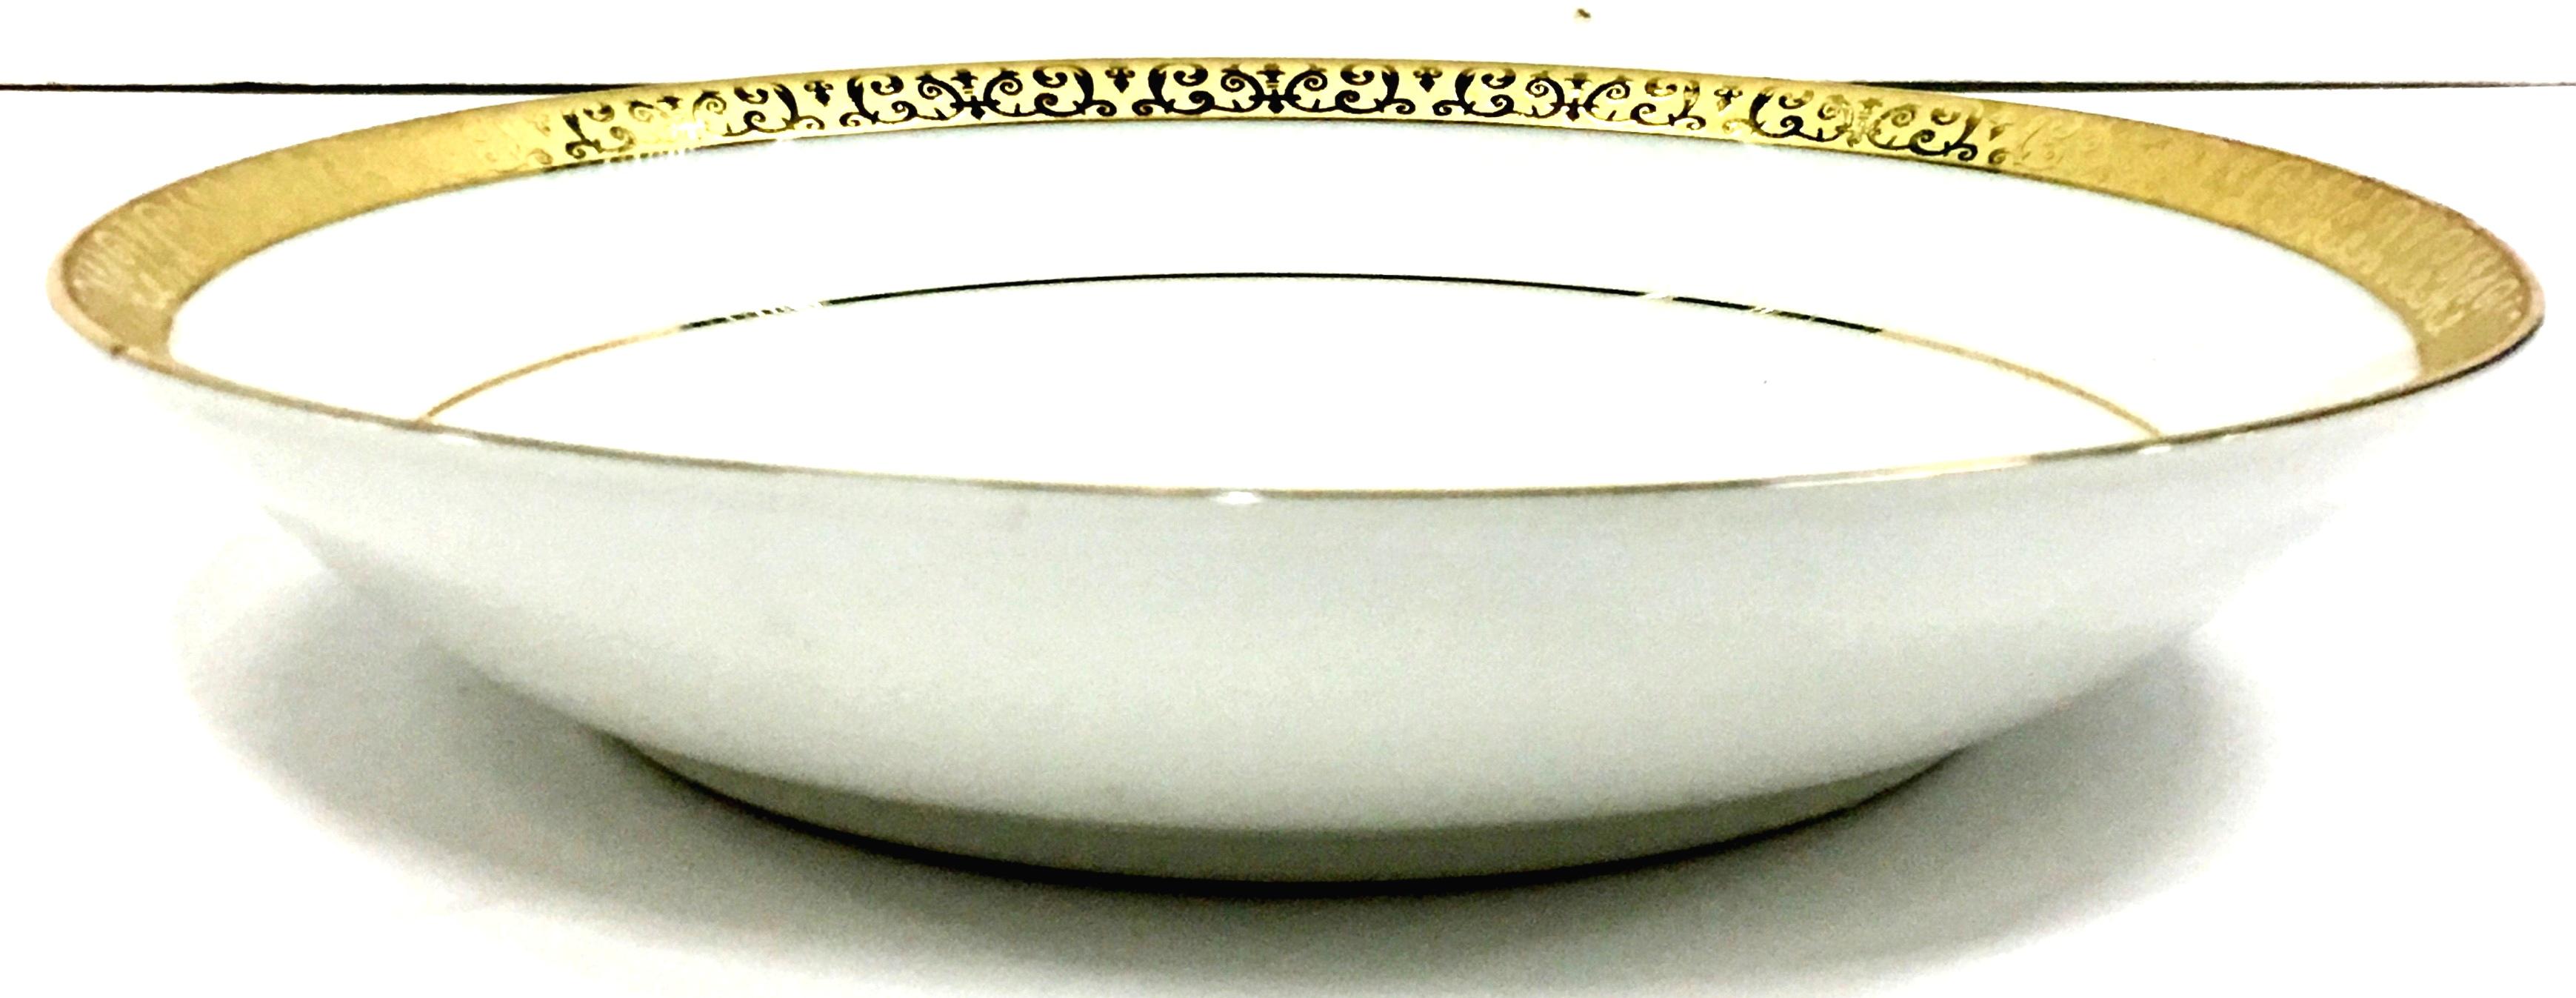 Sri Lankan Porcelain and 22-Karat Gold Dinnerware Set of 14 Pieces by Royal Gallery For Sale